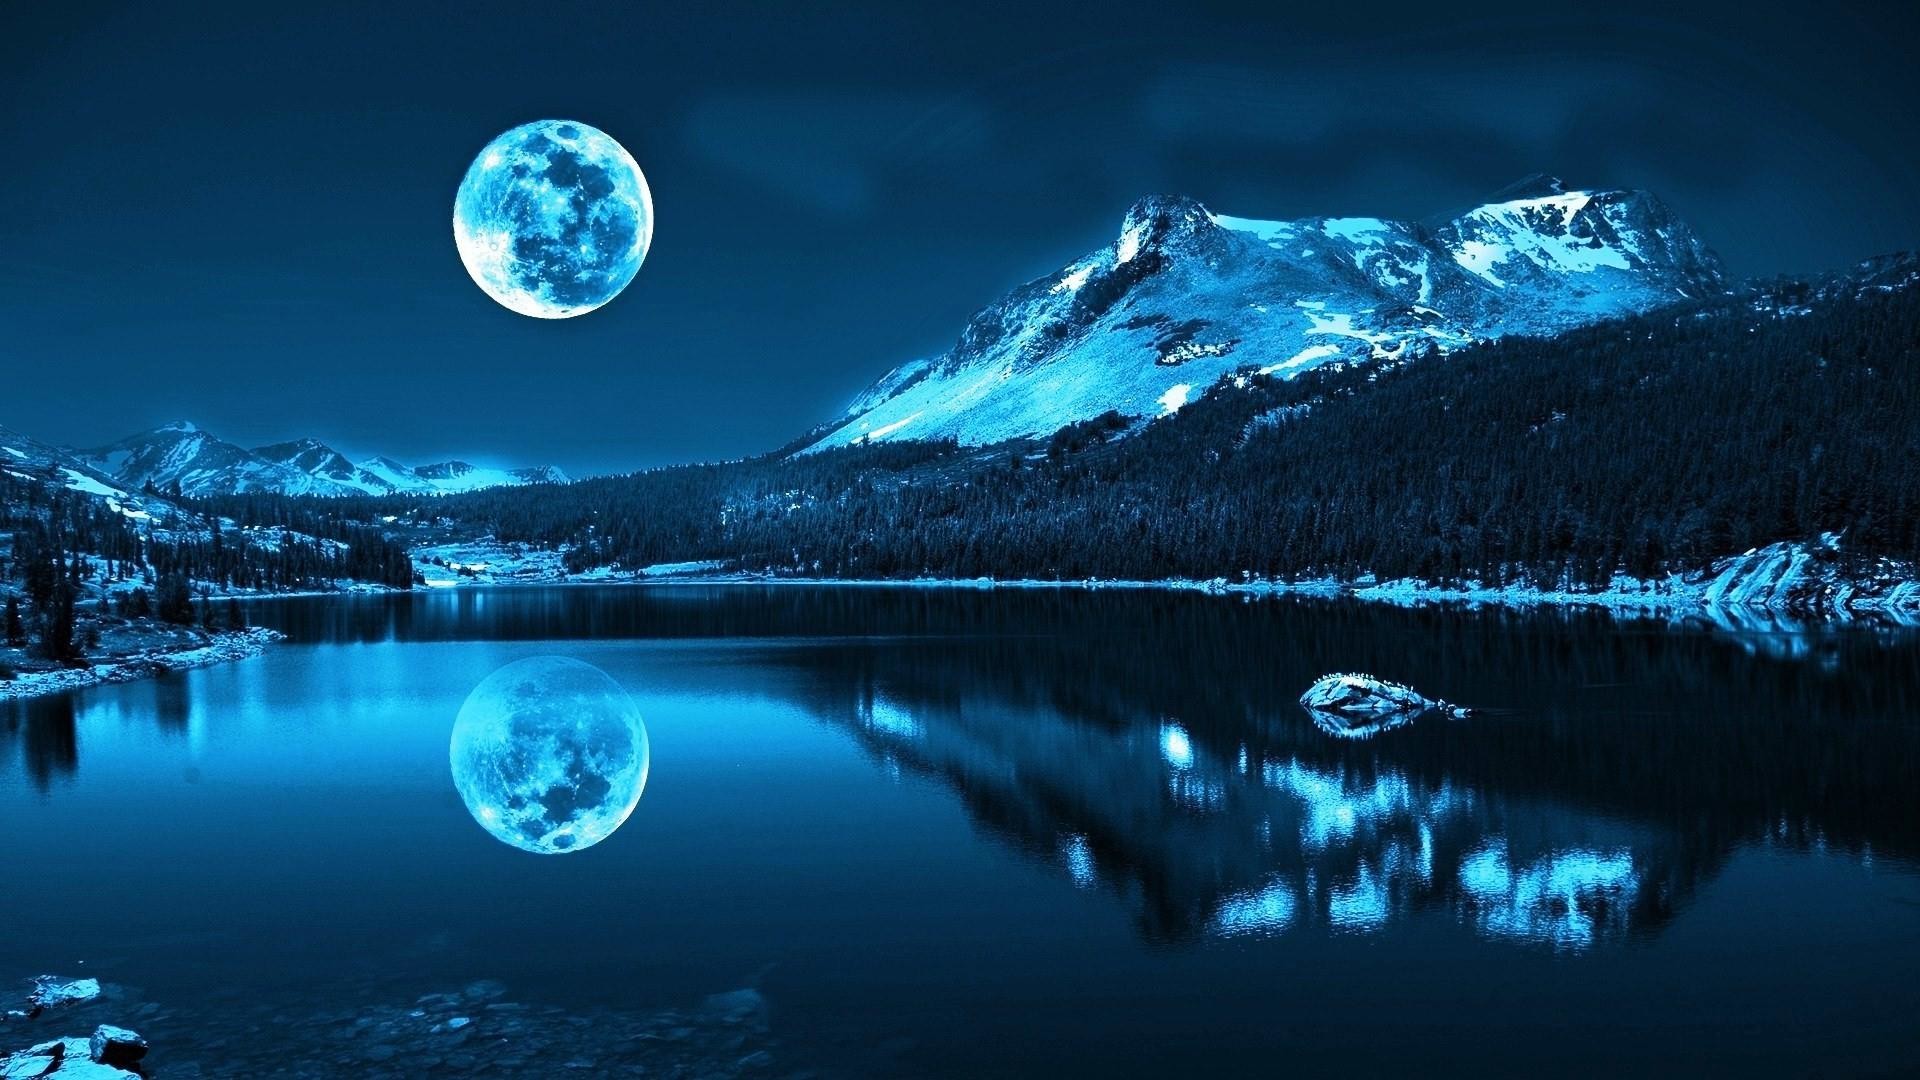 1920x1080 Mountain Moon Lake HD Wallpapers. Download Desktop Backgrounds, Photos,  Mobile Wallpapers in HD